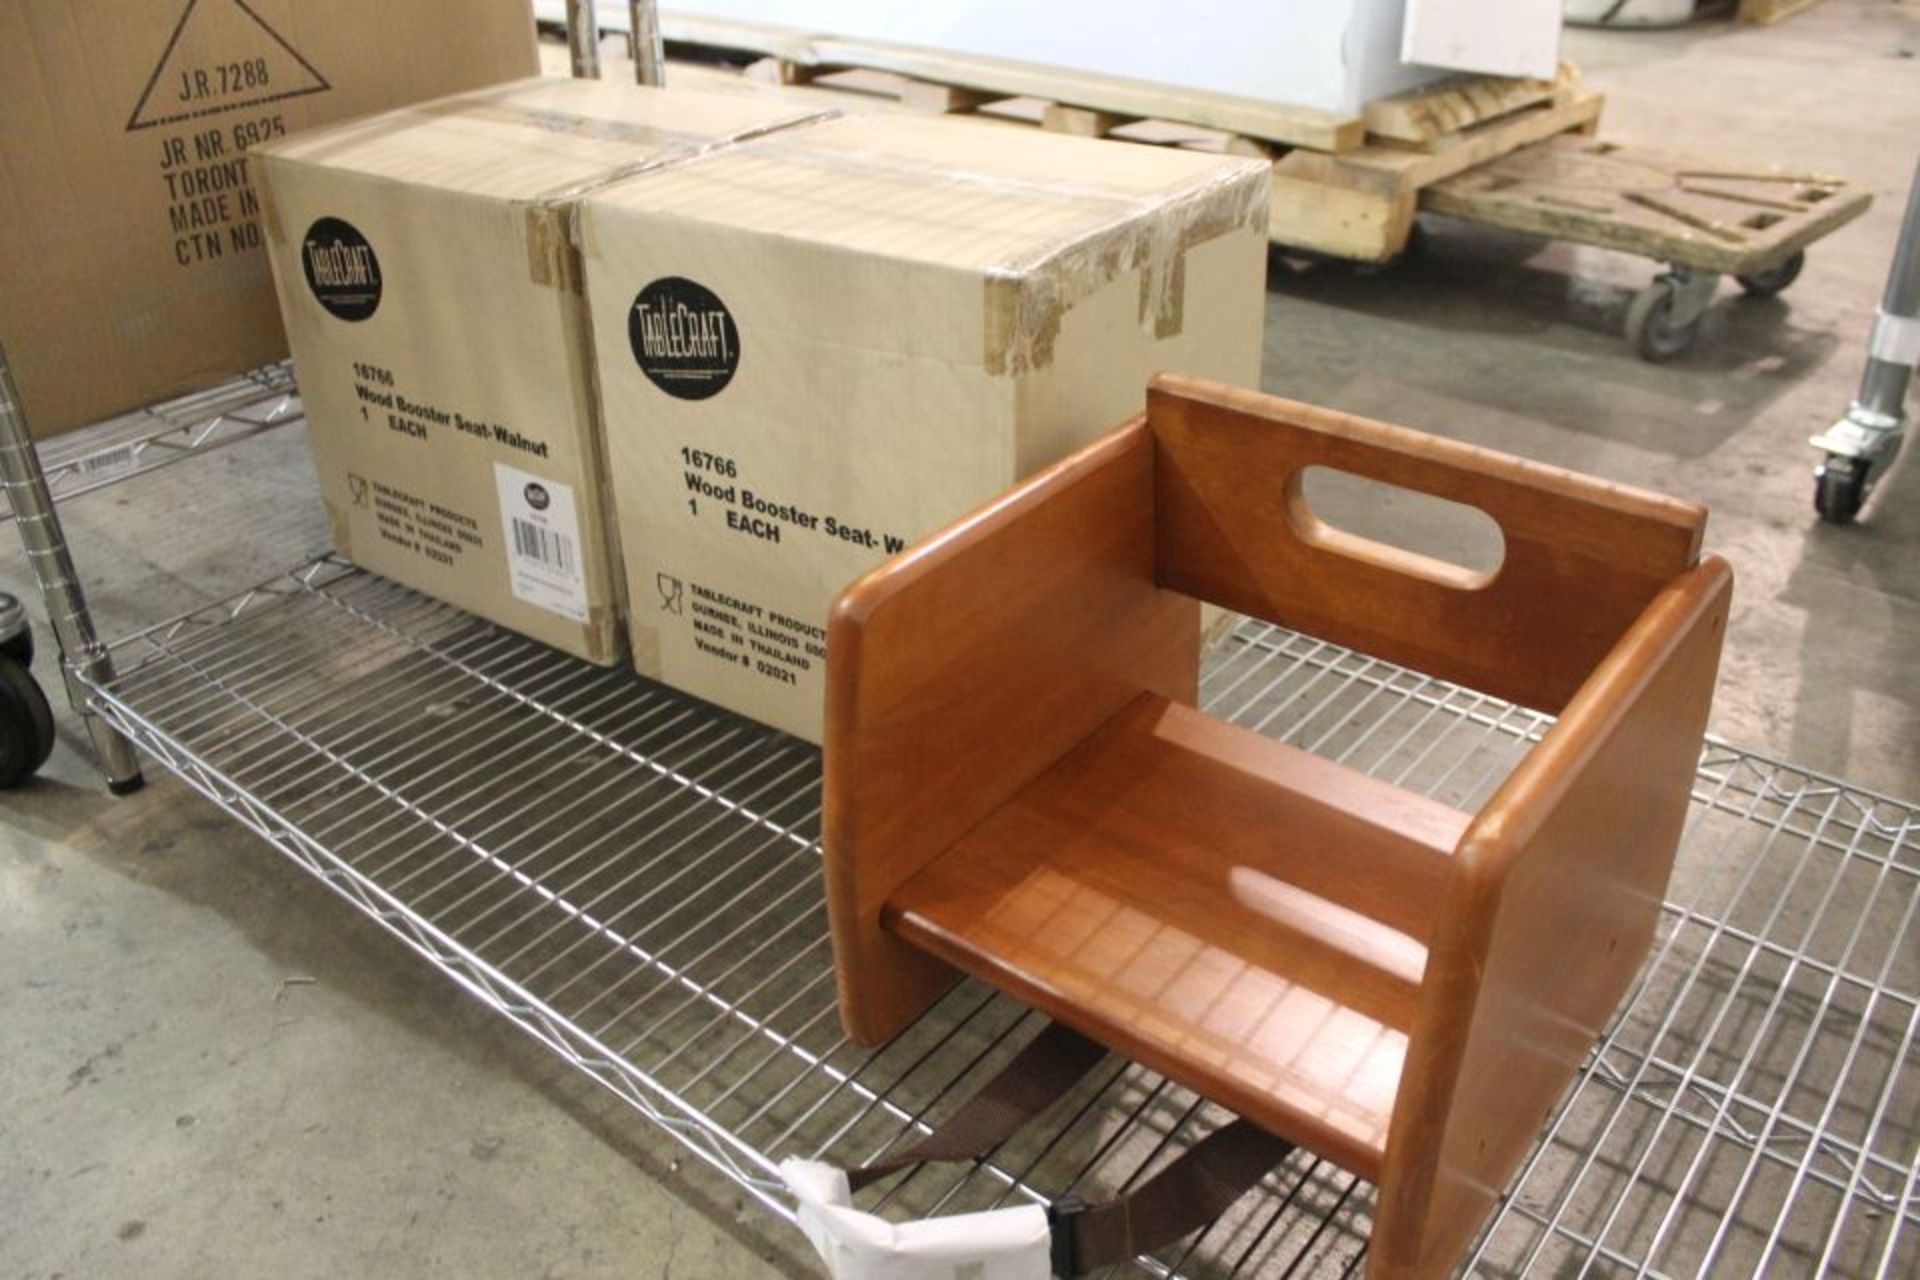 Tablecraft booster seats, lot of (3) wood, walnut finish, model 16766 NEW one open - Image 2 of 2